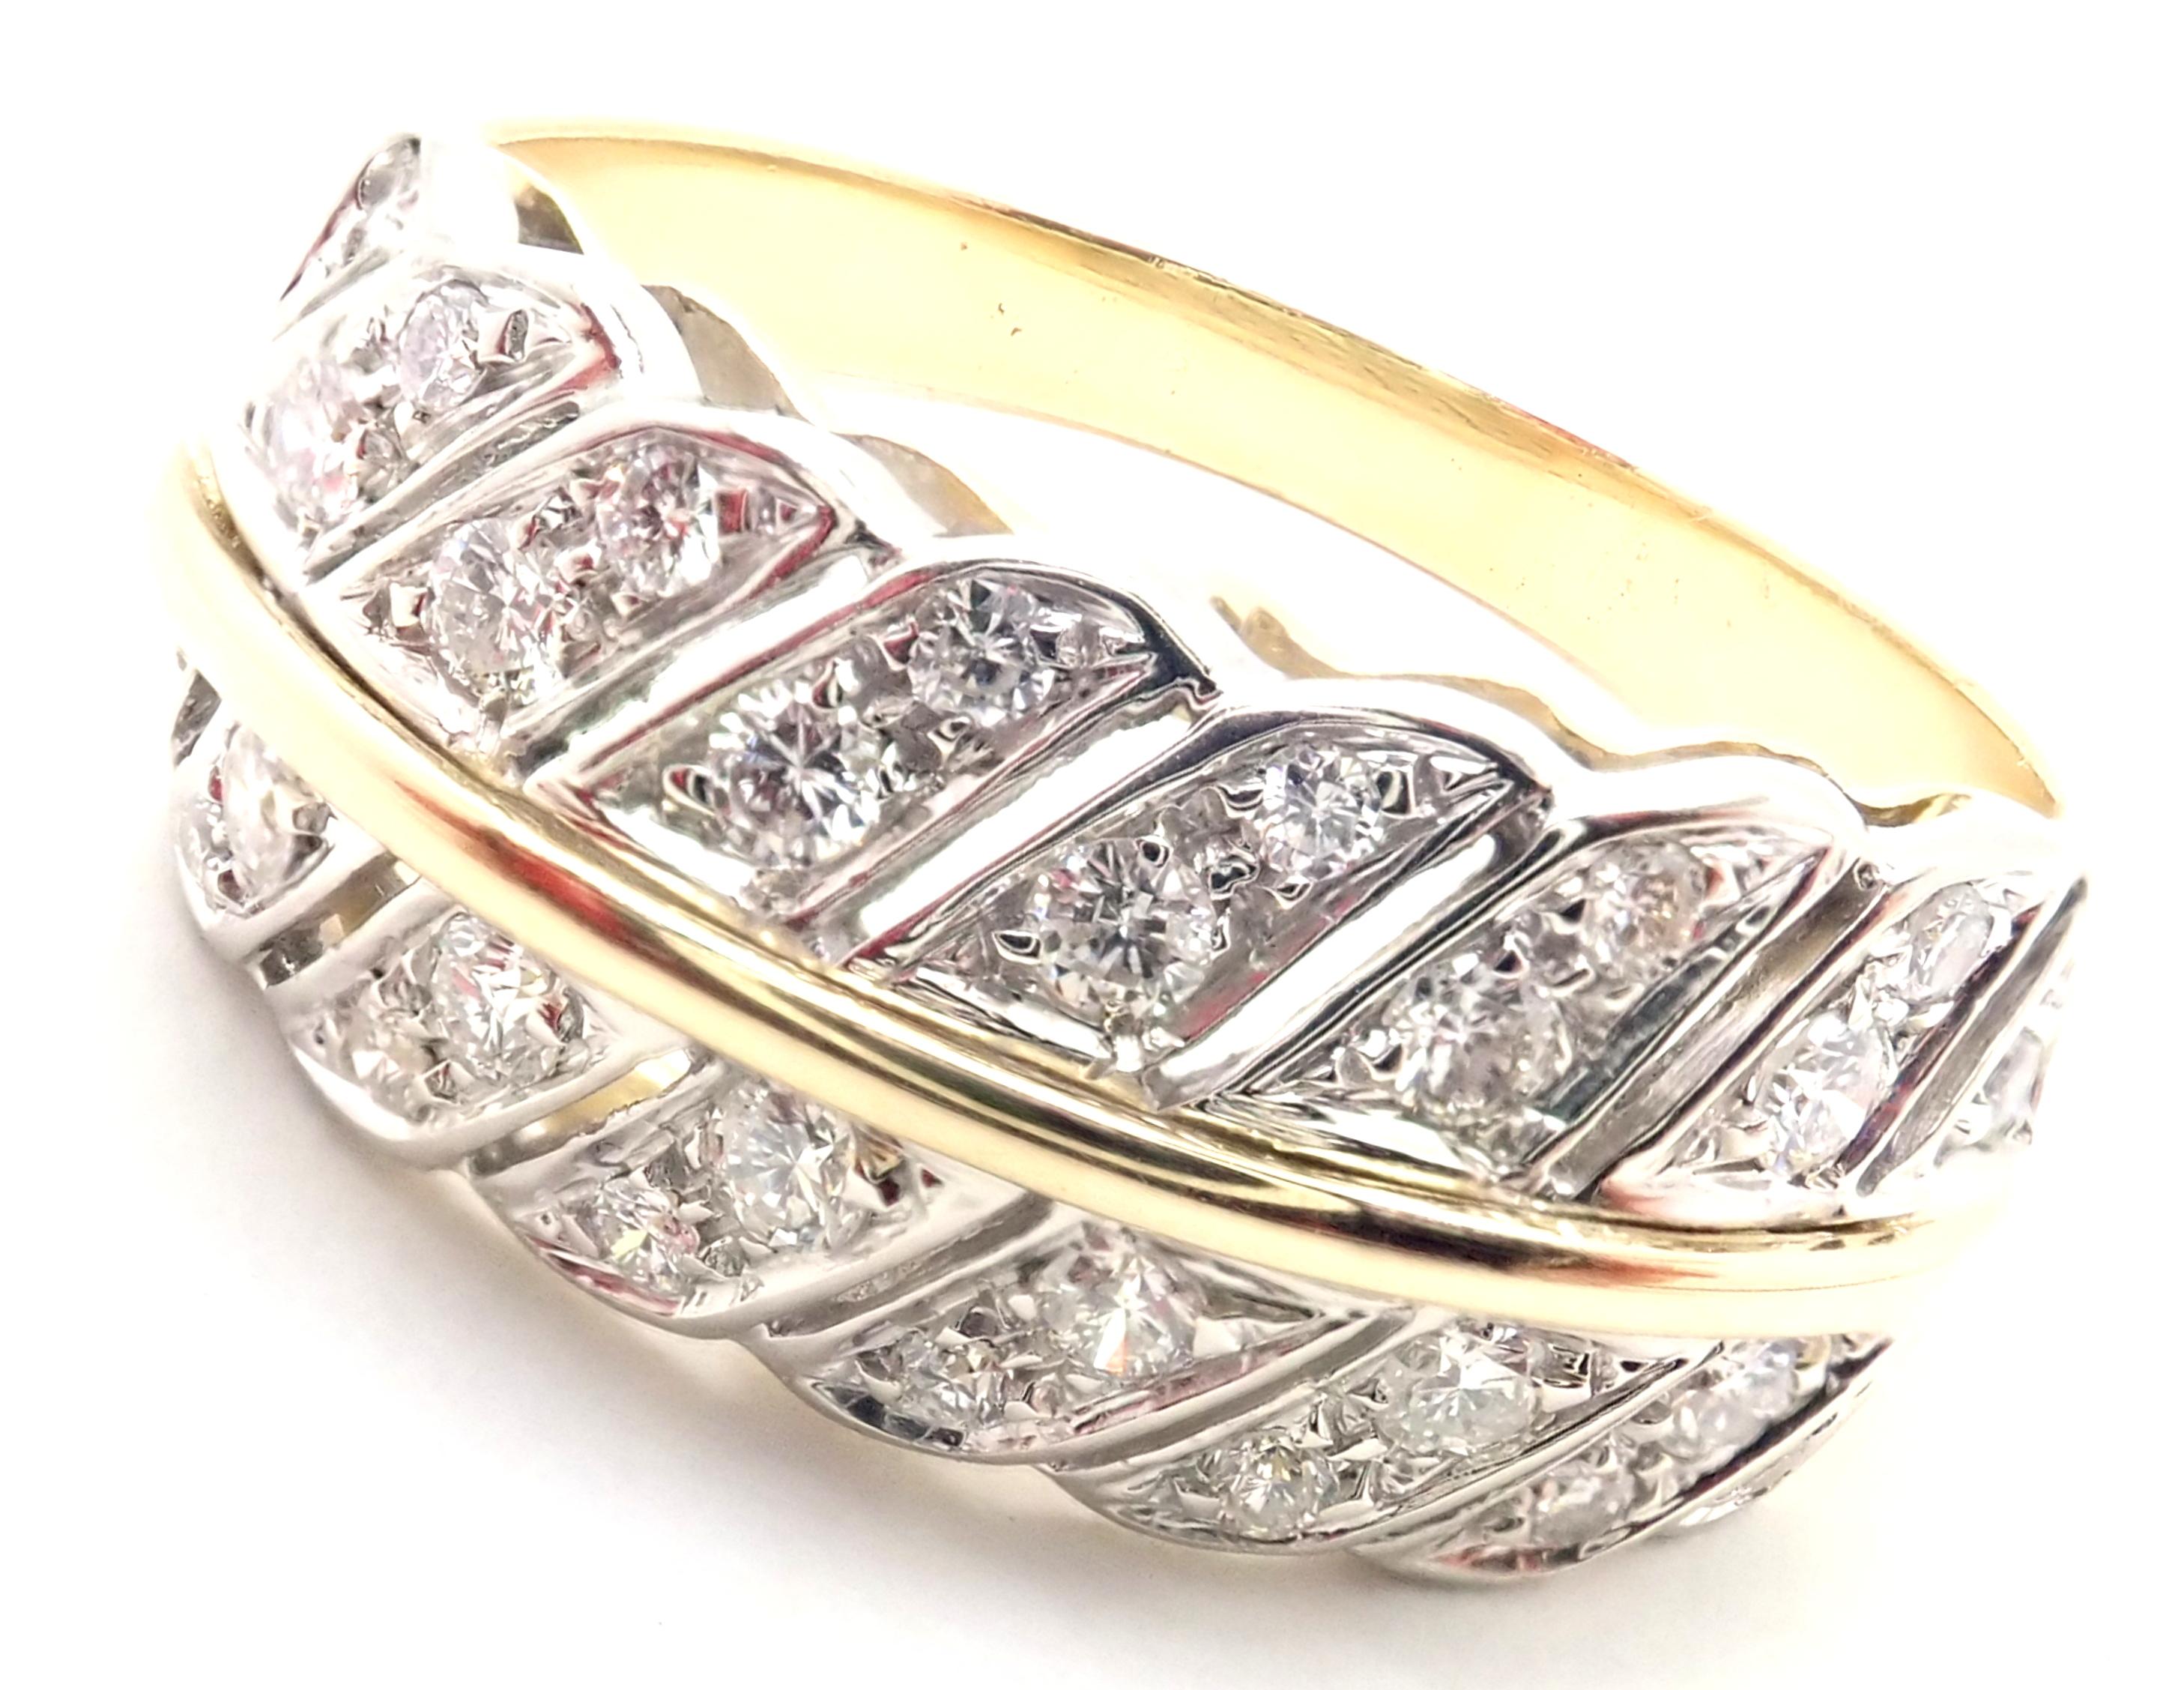 18k Yellow Gold Diamond Band Ring by H. Stern. 
With 28 round brilliant cut diamonds VS1 clarity, G color total weight approximately .70ct
Details: 
Size: 8.5	
Weight: 6.5 grams
Width: 10mm	
Stamped Hallmarks: H. Stern Hallmarks 750 
*Free Shipping